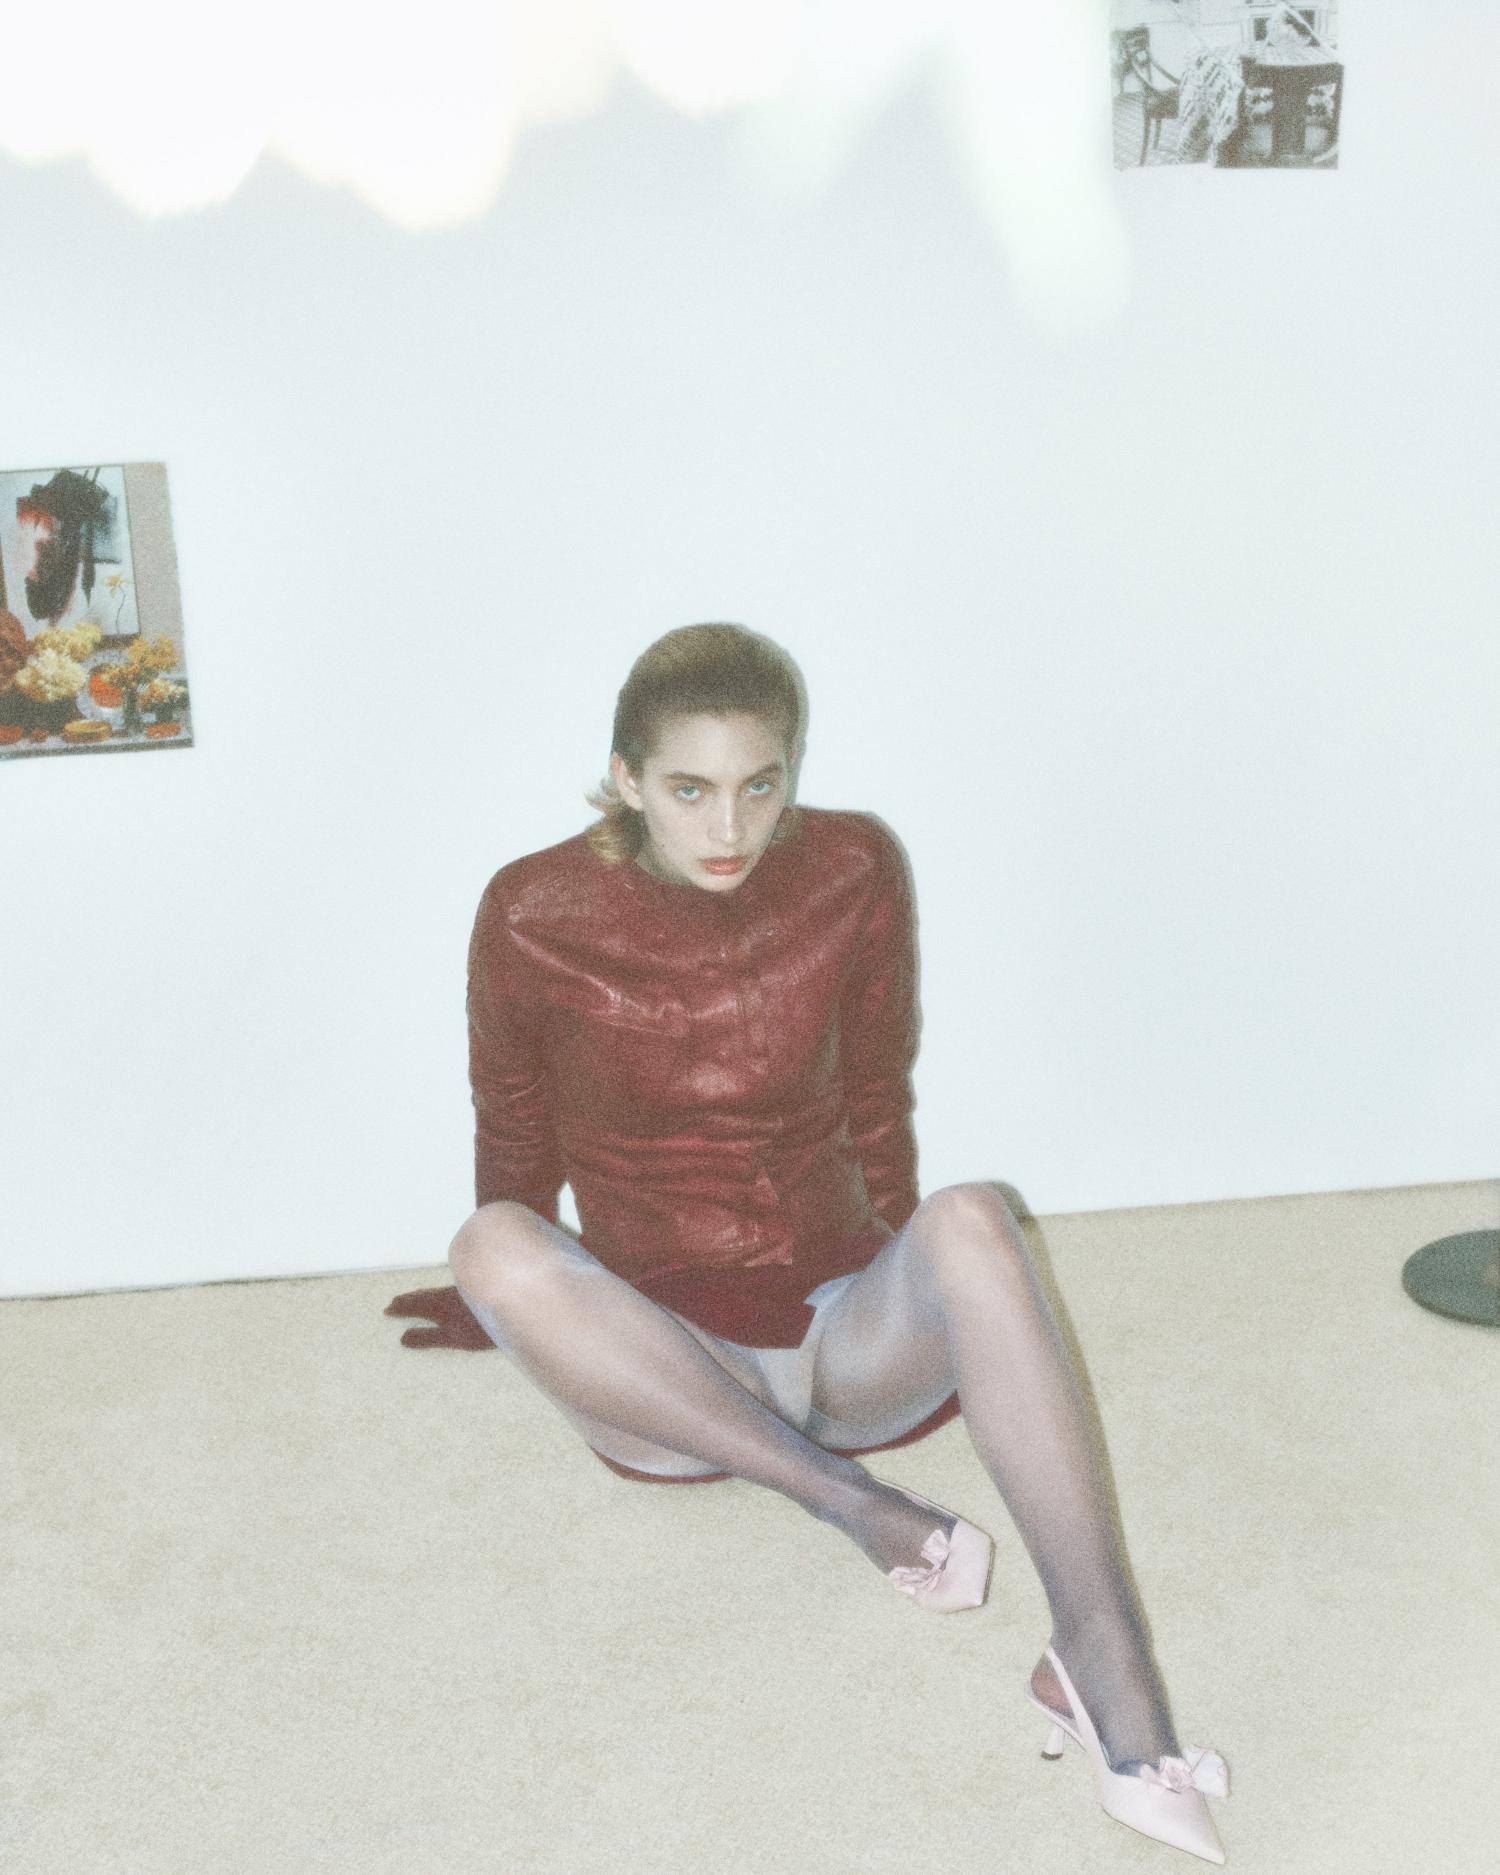 Acne Studios Red Leather Jacket and Skirt, Jimmy Choo Leather Slingback Pumps and Dents Suede Gloves Fashion Editorials